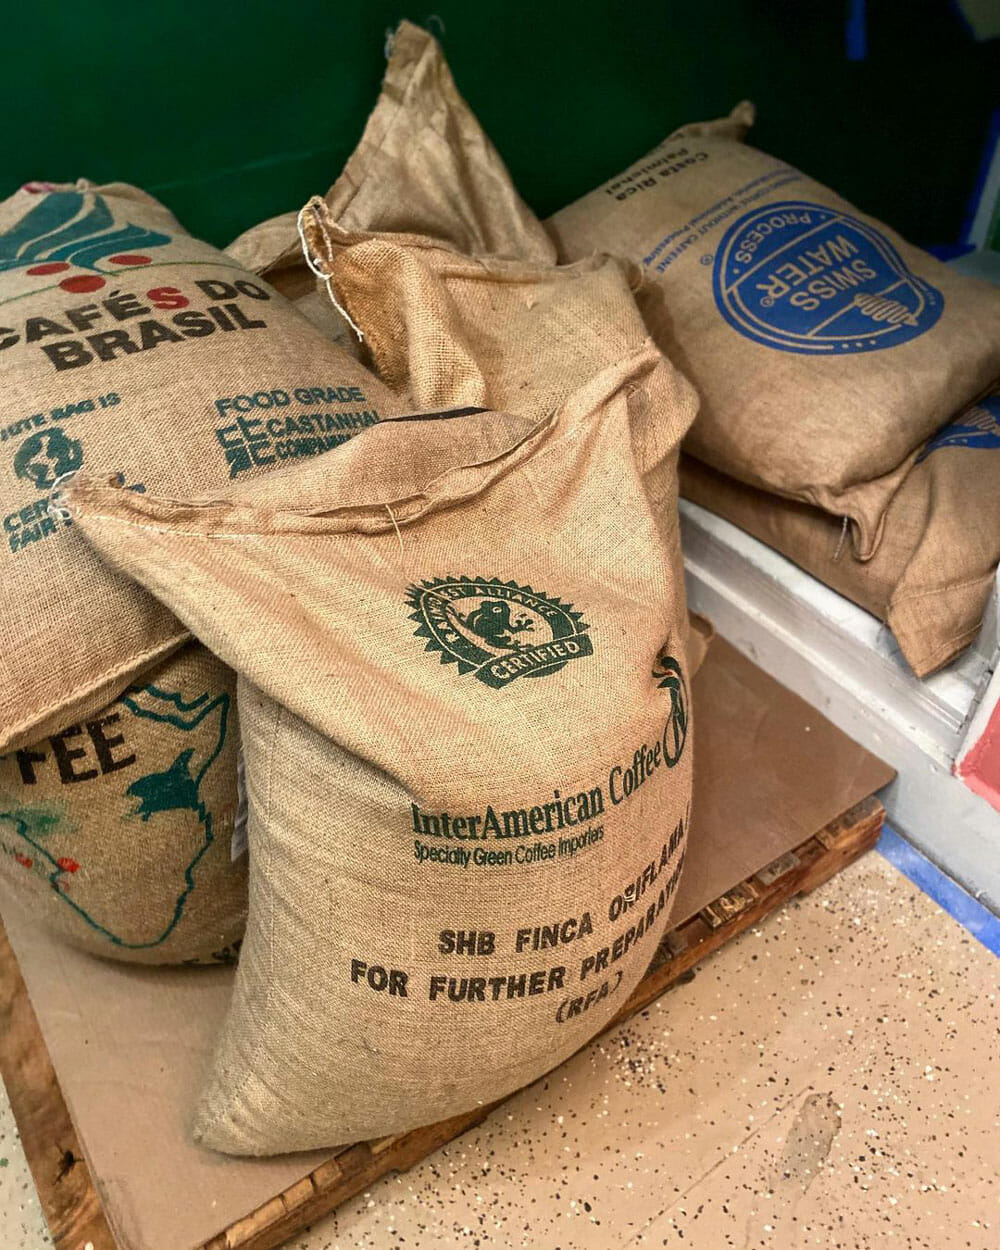 Several burlap bags of coffee lying on wooden pallets.